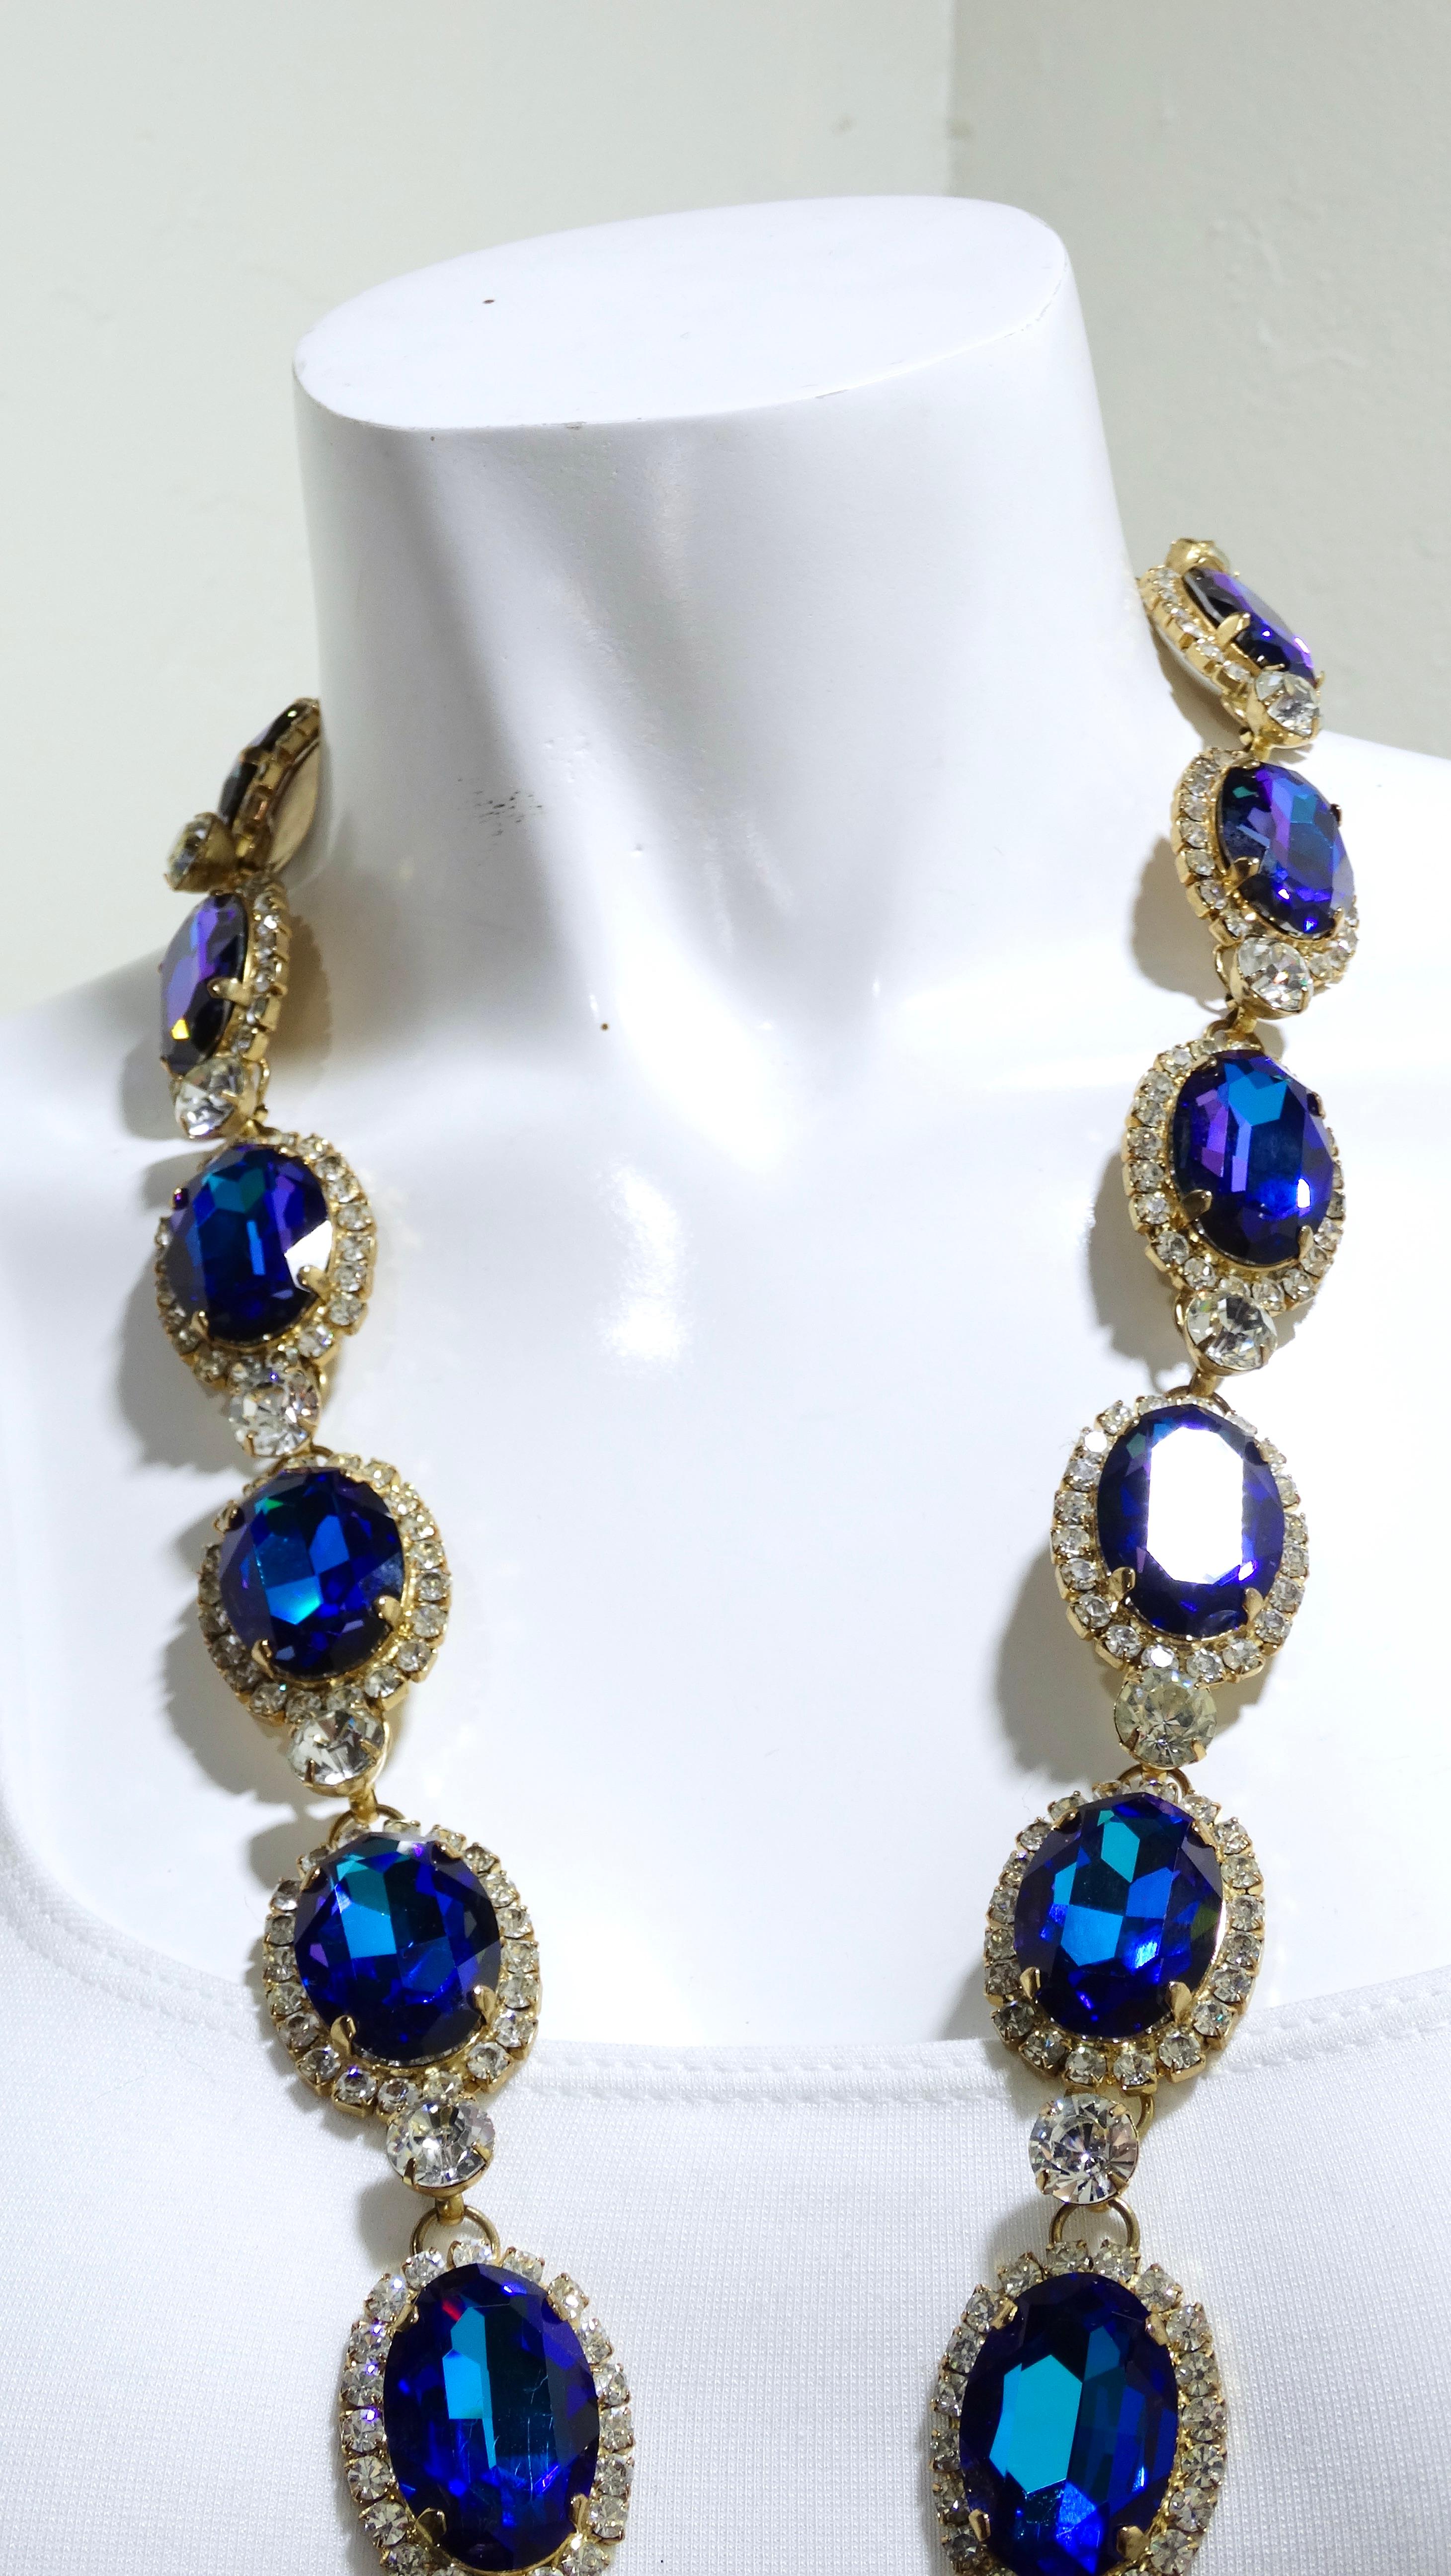 Kenneth Jay Lane 1960s Jeweled Statement Necklace In Good Condition For Sale In Scottsdale, AZ